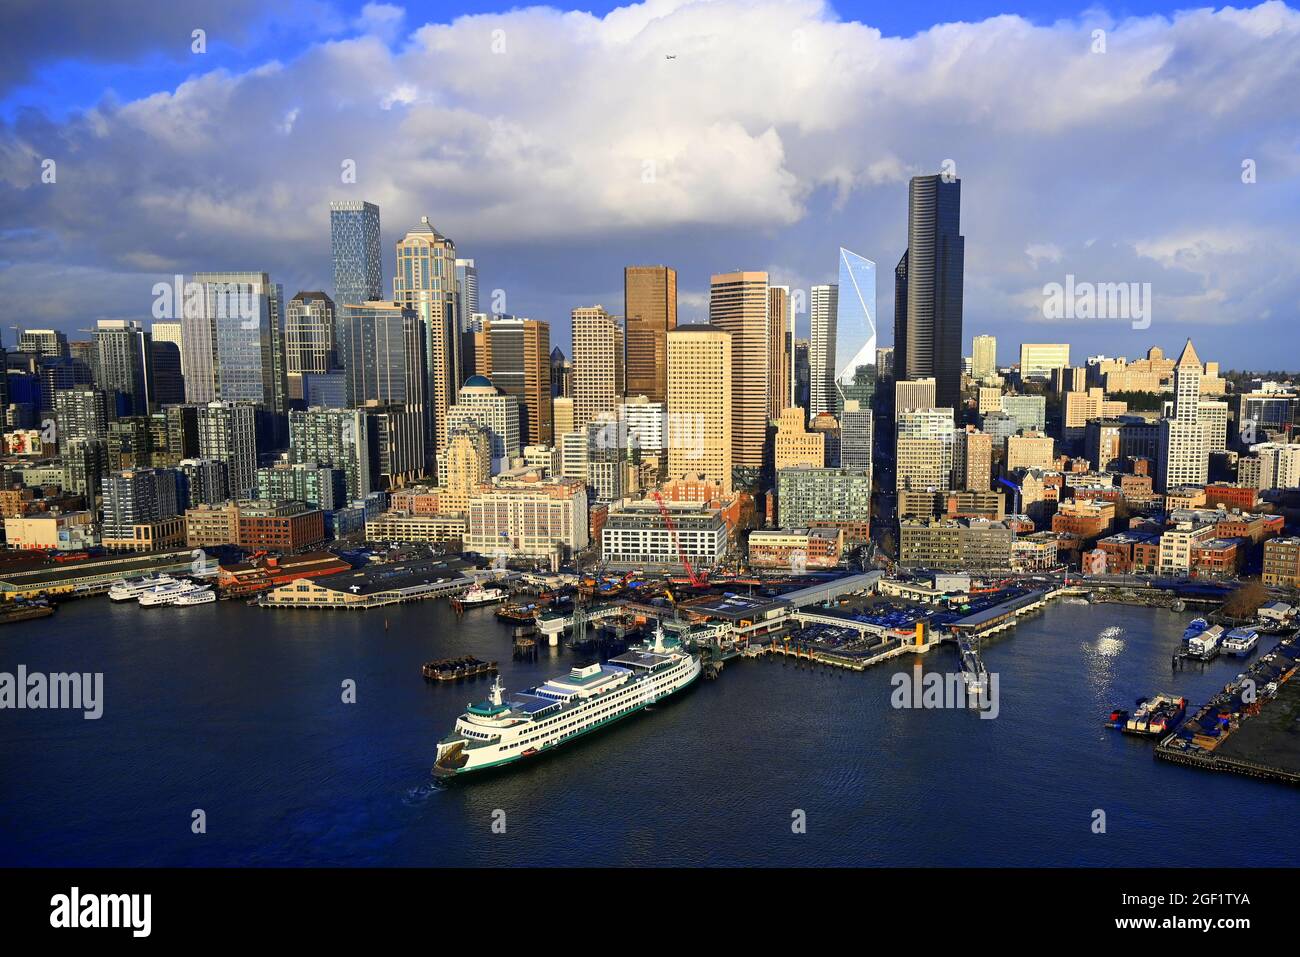 SEATTLE, WASHINGTON, USA, AERIAL VIEW, WITH PUGET SOUND FERRY IN PORT Stock Photo